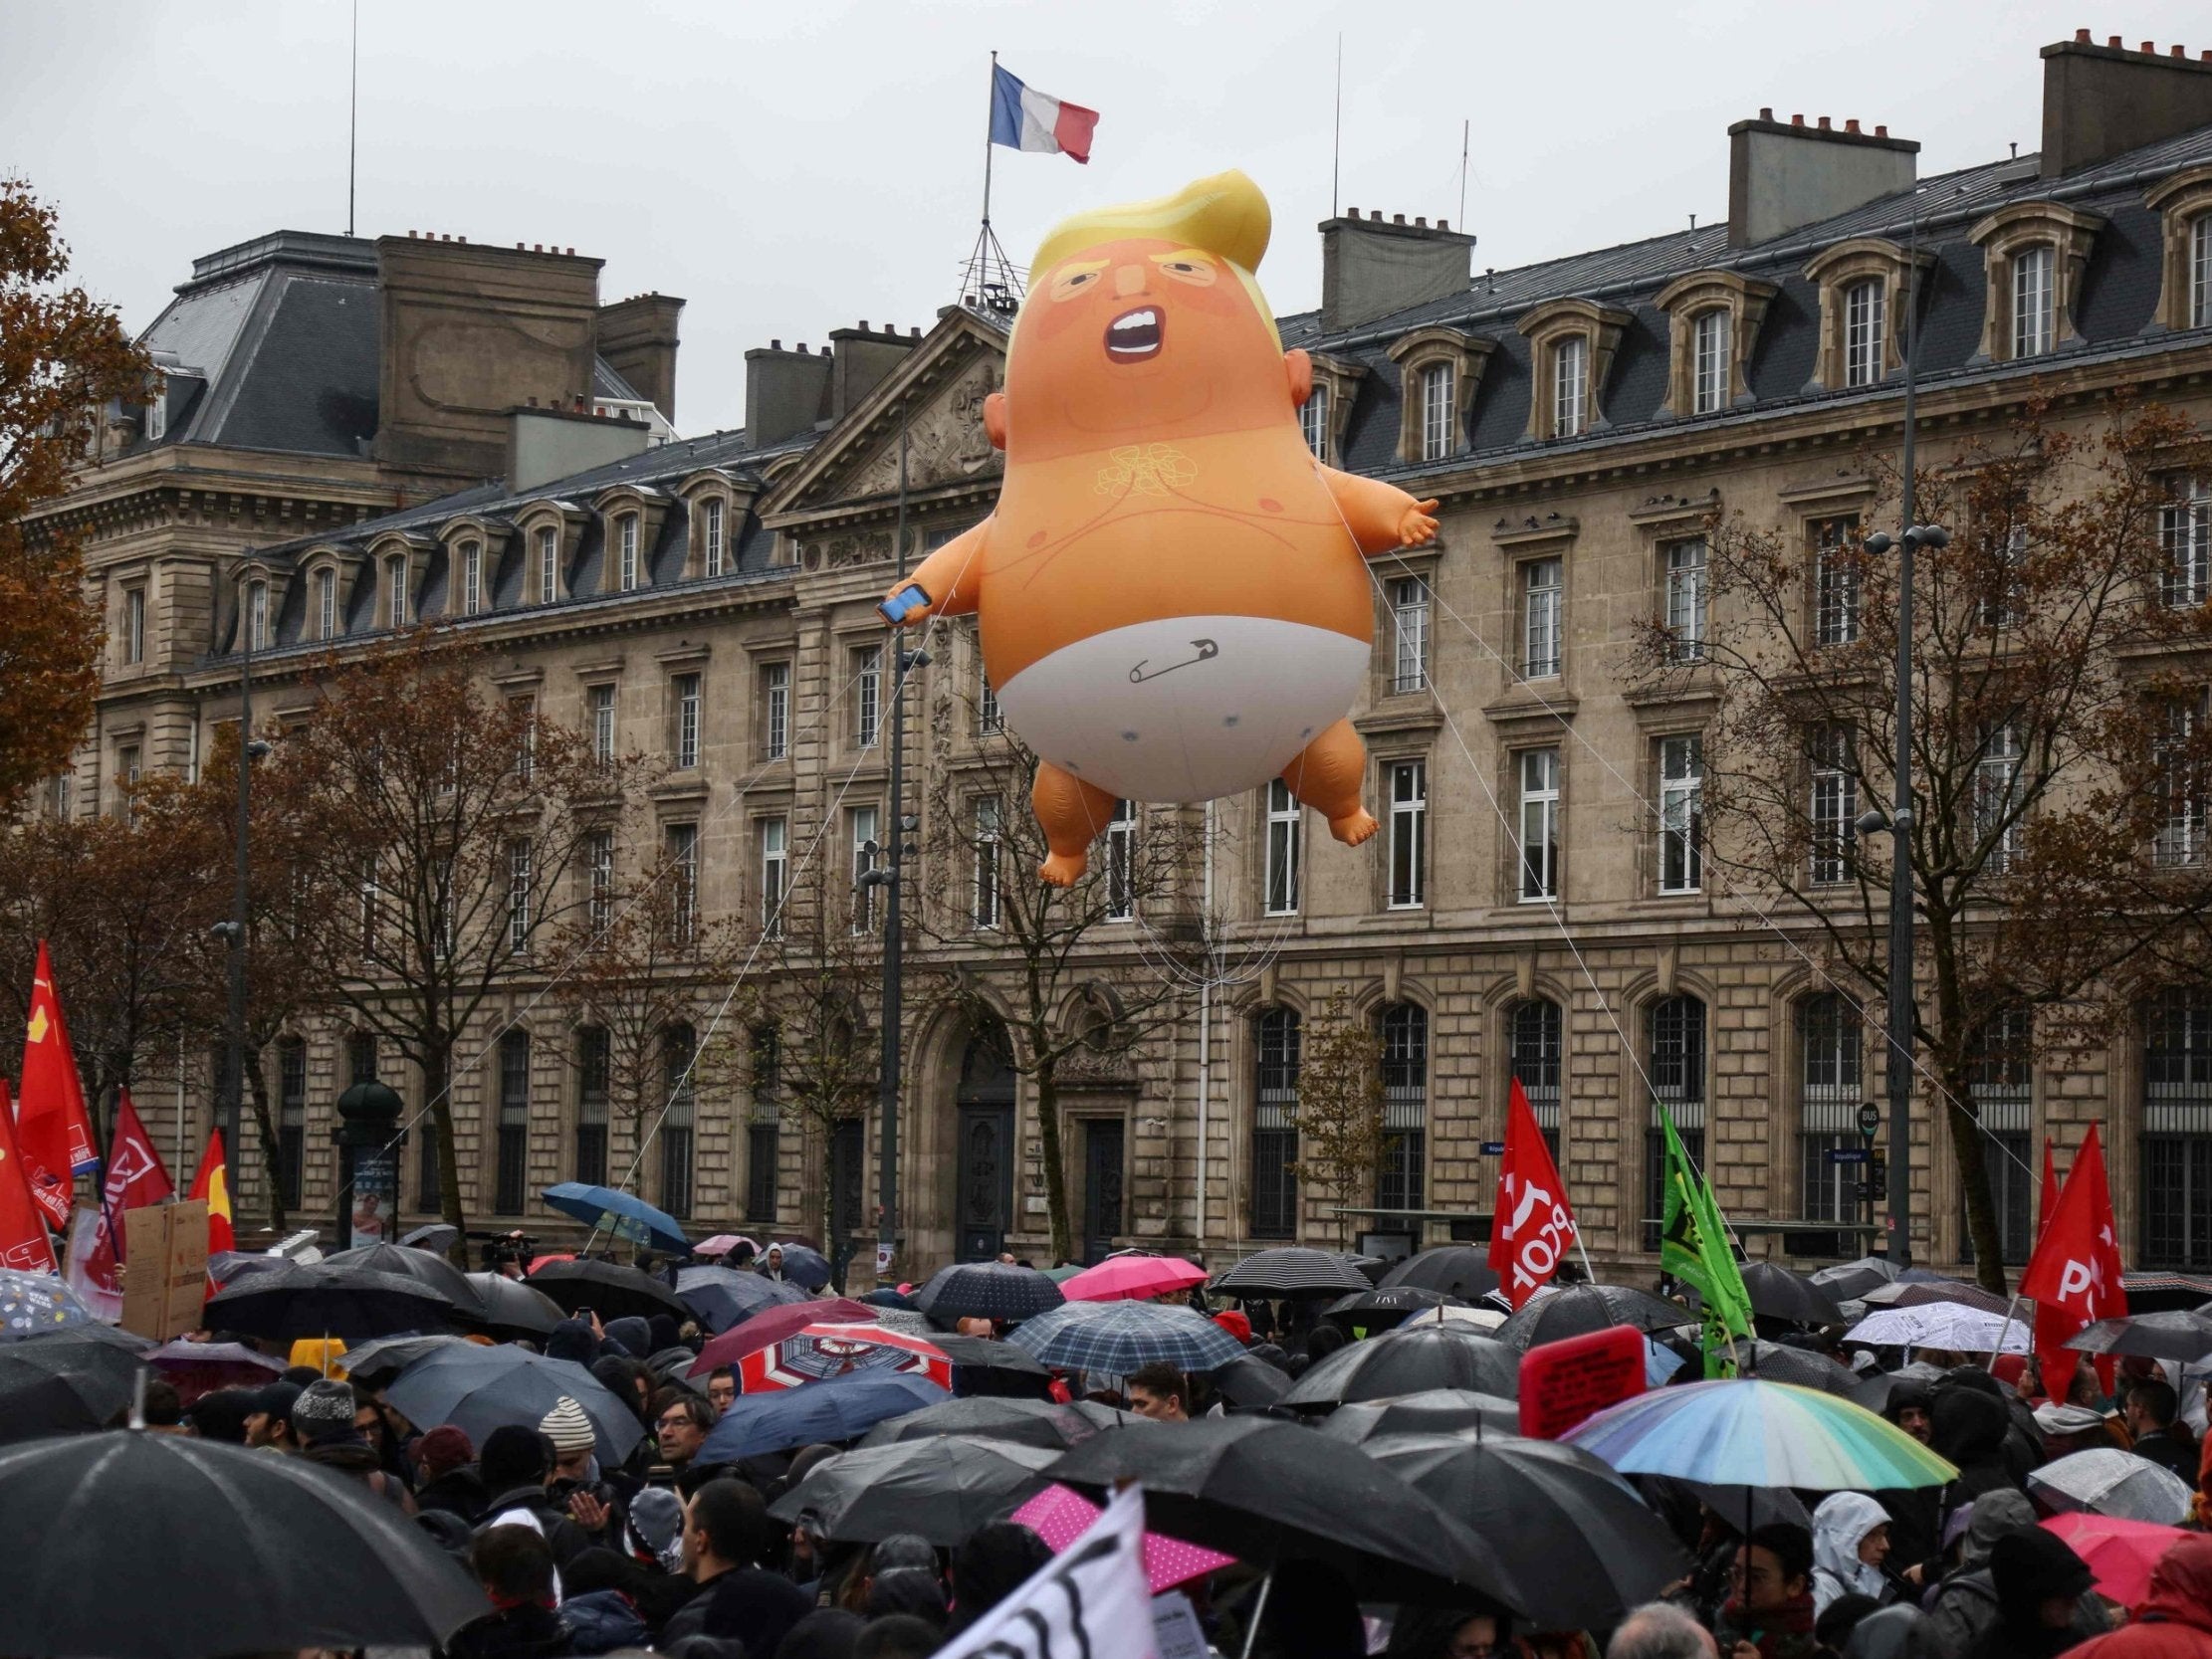 Trump baby balloon flies in Paris for US president&apos;s Remembrance Day visit